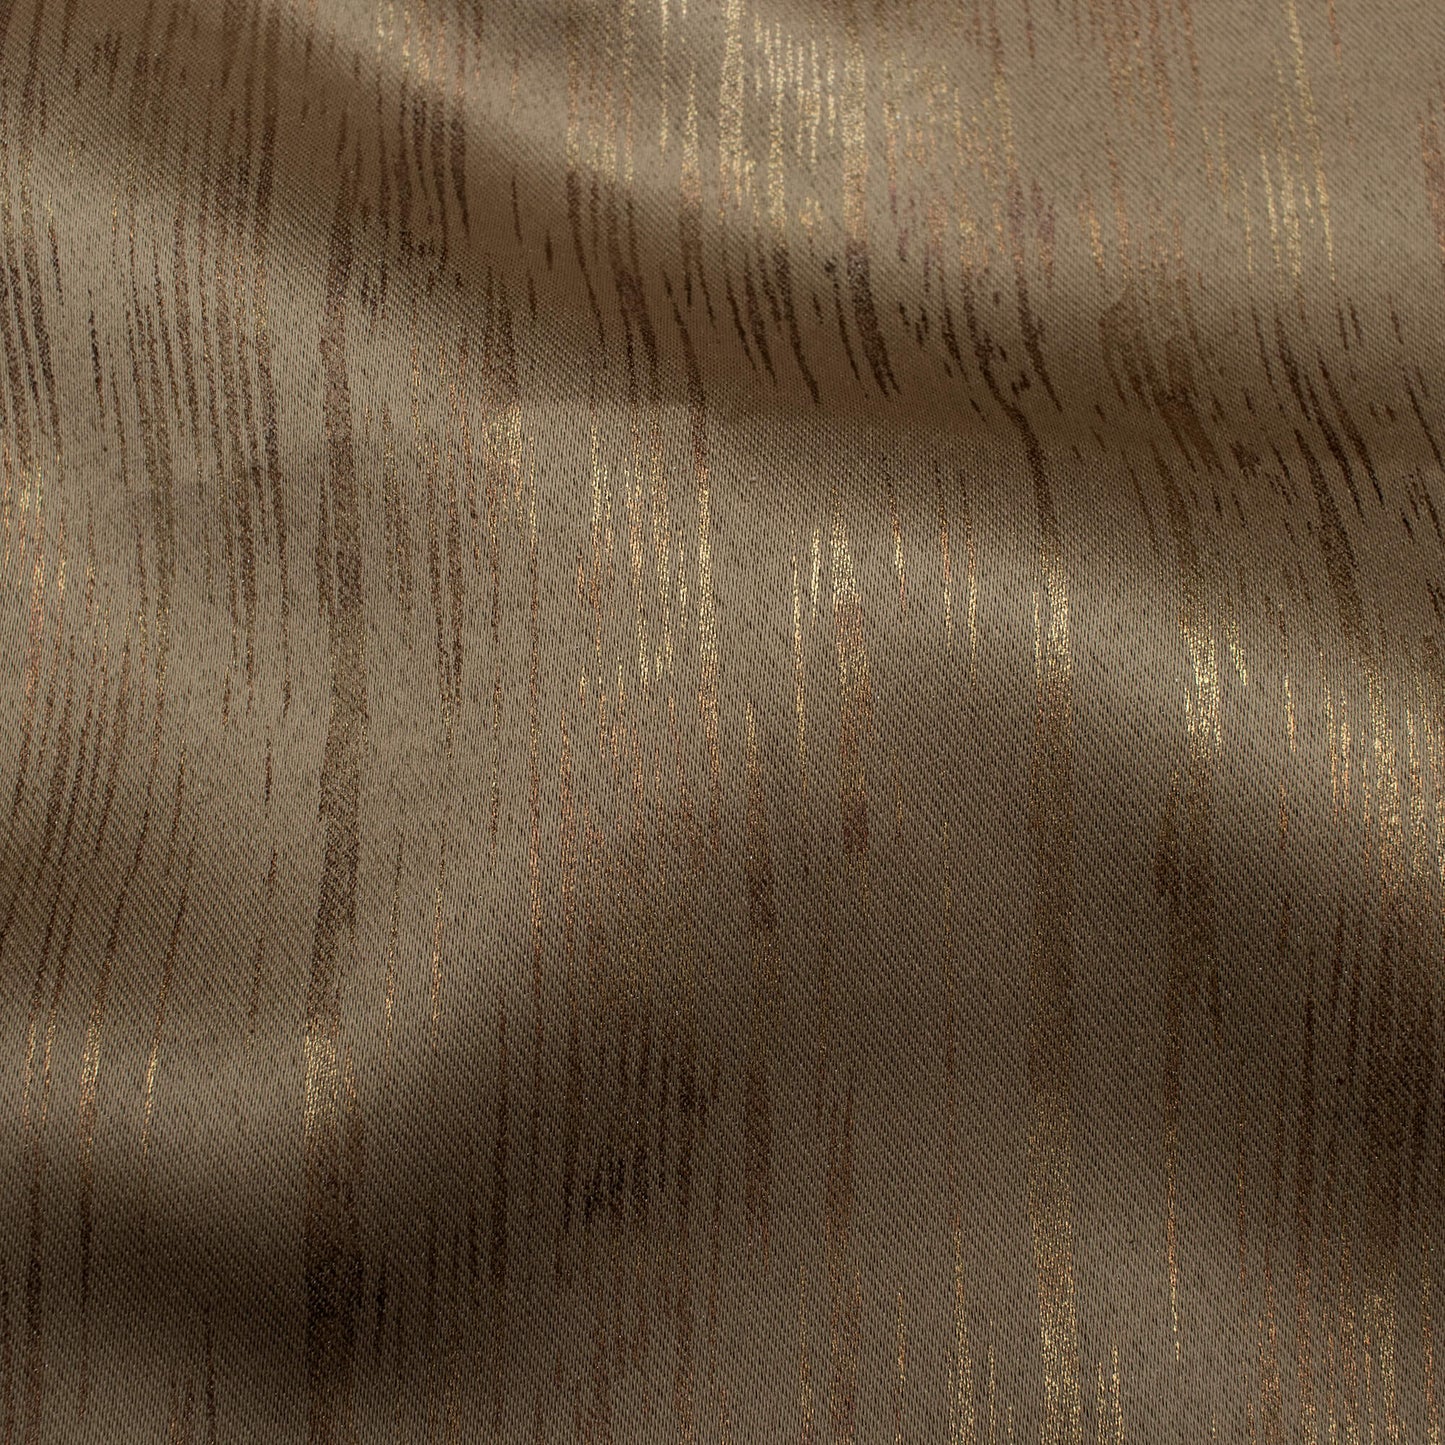 Rustic Taupe Brown Textured Golden Foil Premium Curtain Fabric (Width 54 Inches)